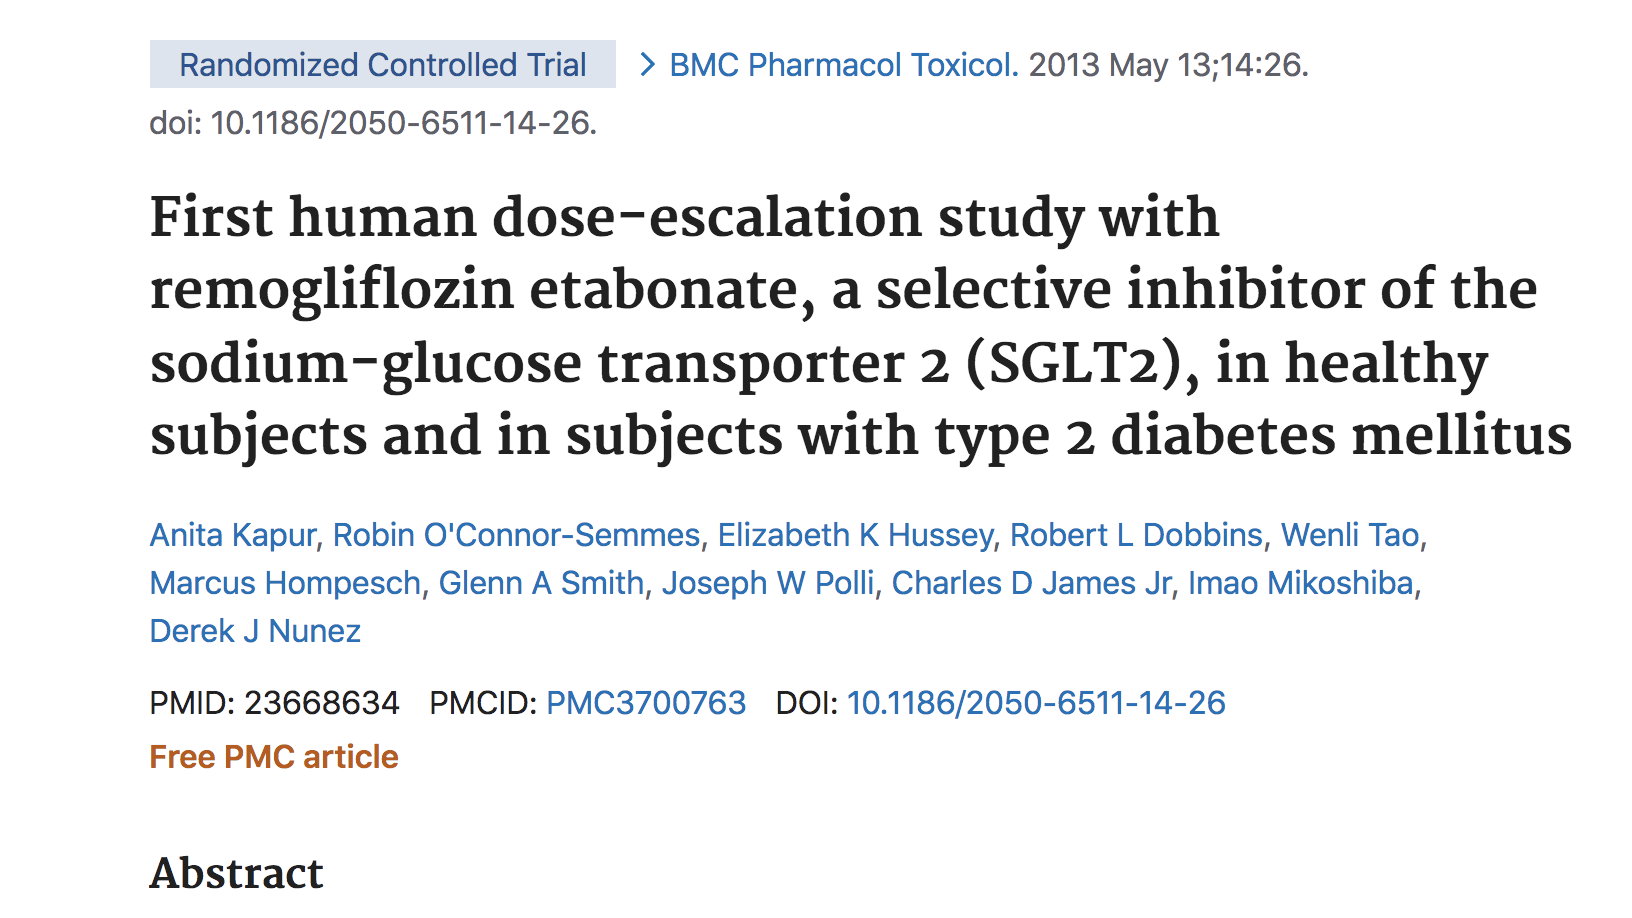 image of First human dose-escalation study with remogliflozin etabonate, a selective inhibitor of the sodium-glucose transporter 2 (SGLT2), in healthy subjects and in subjects with type 2 diabetes mellitus